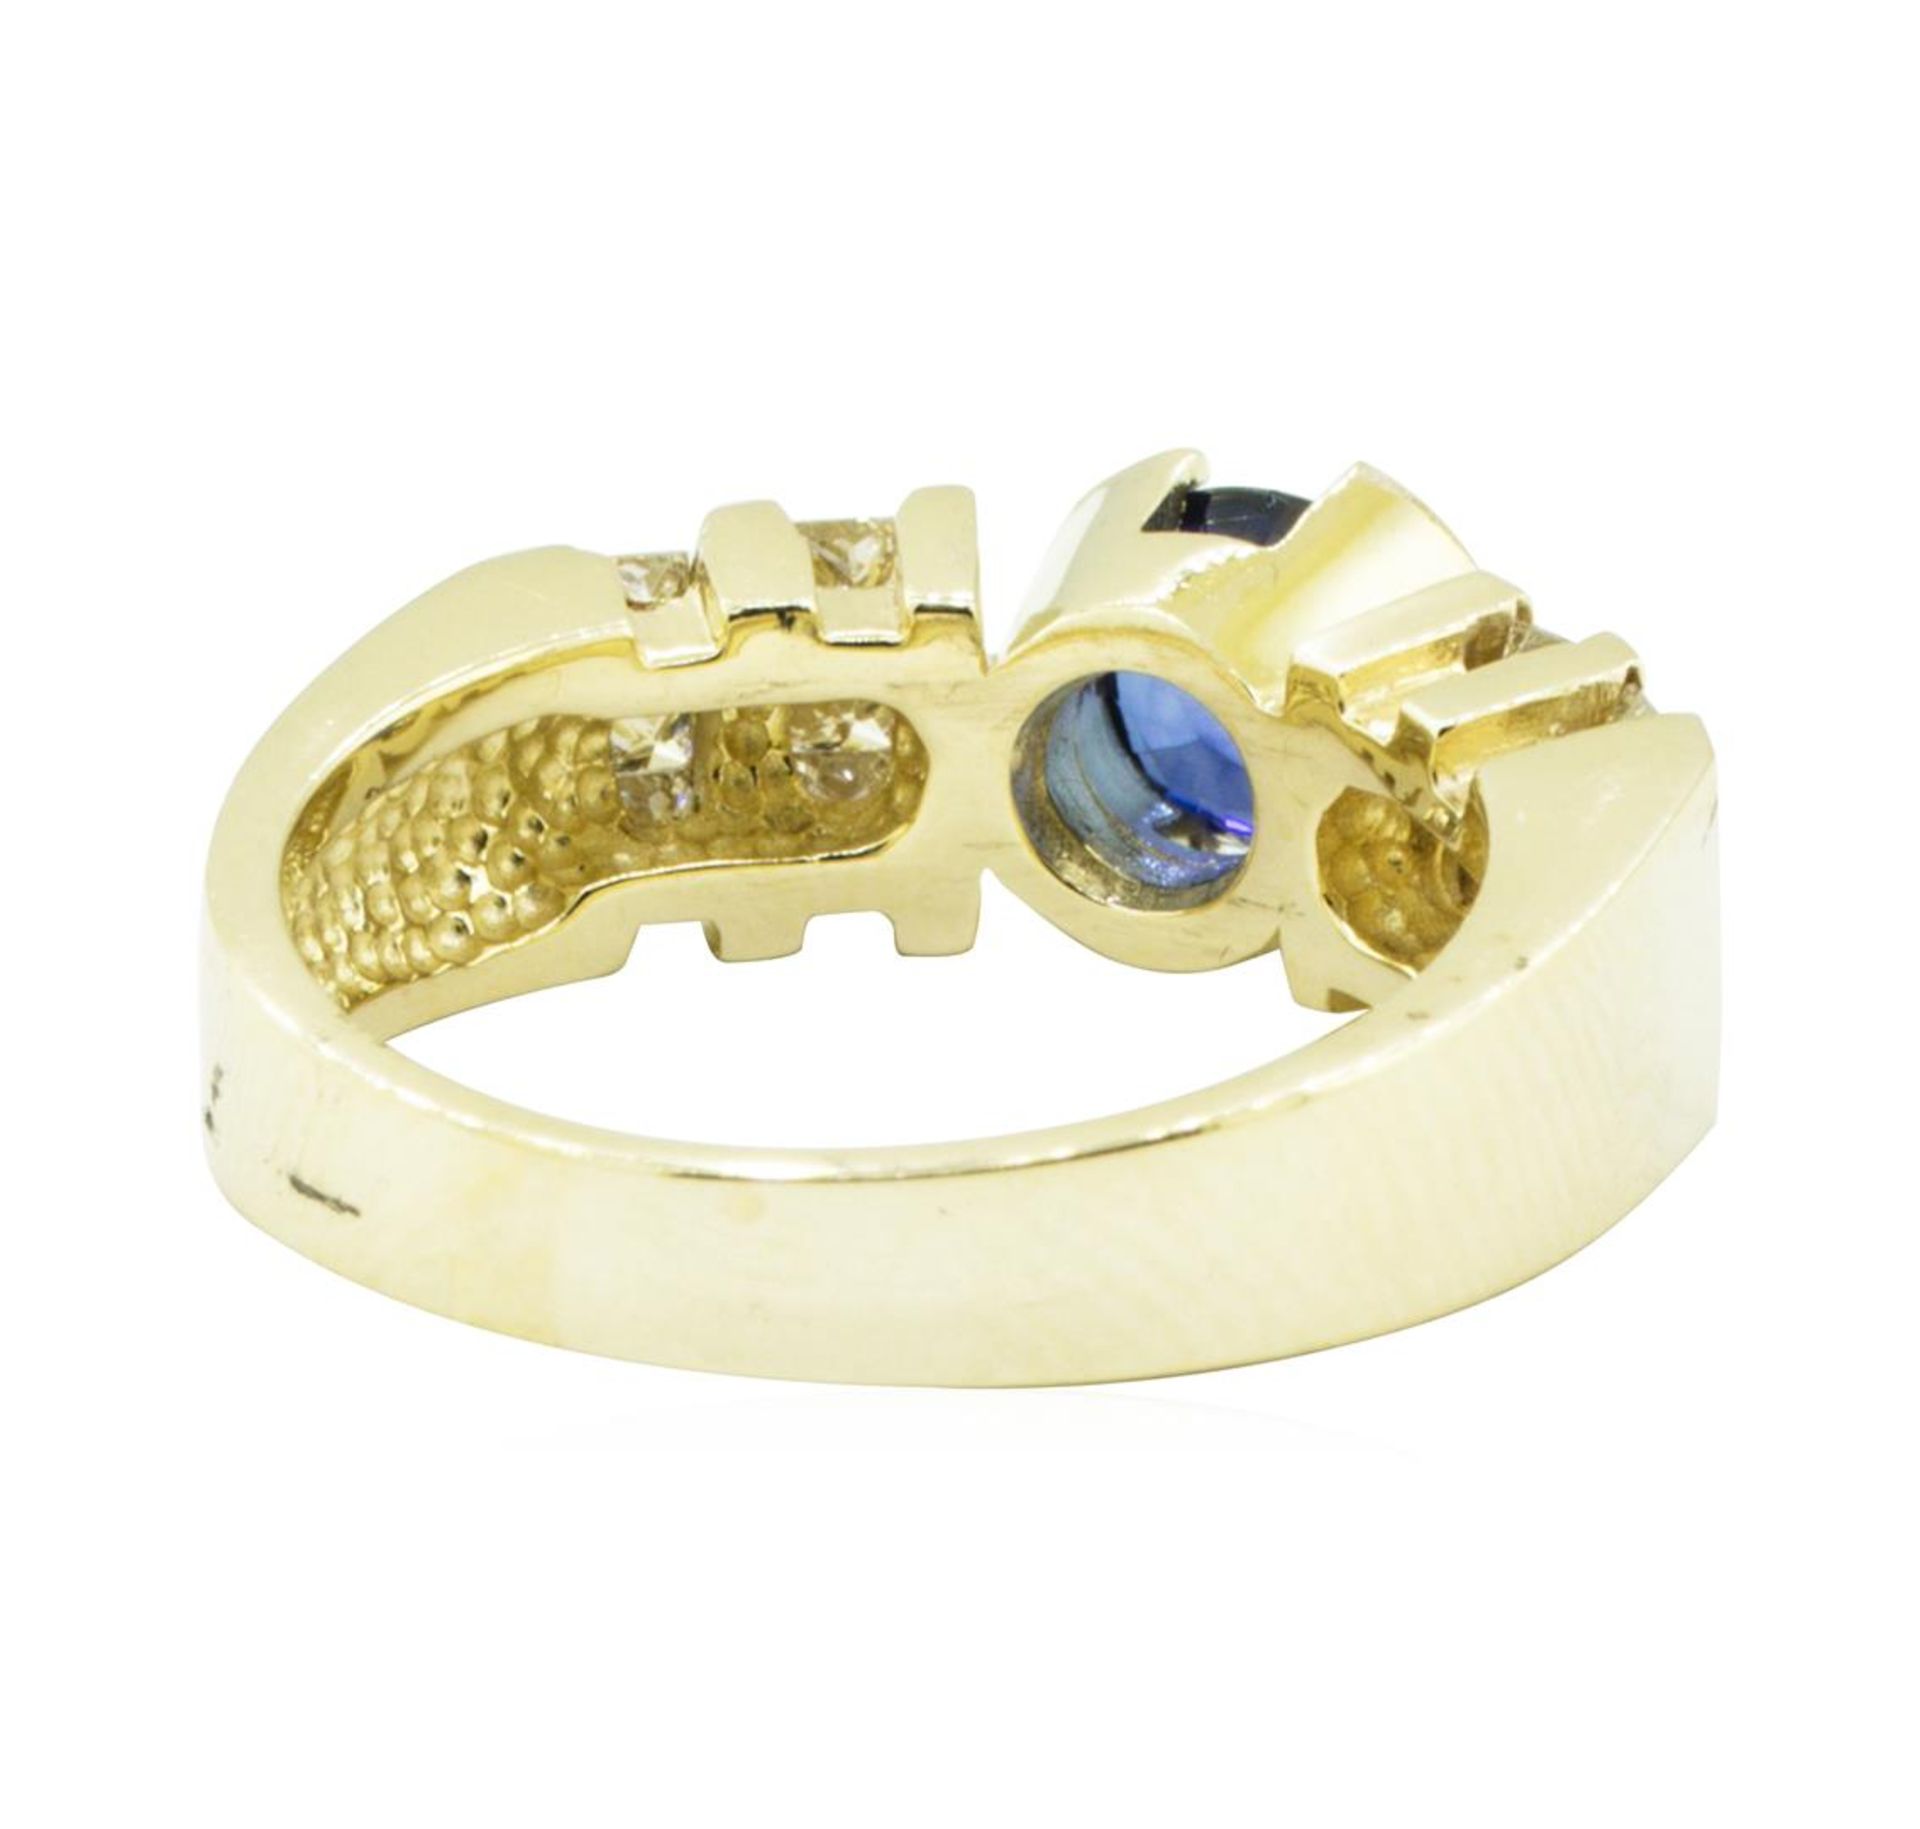 1.45 ctw Blue Sapphire and Diamond Ring - 14KT Yellow Gold - Image 3 of 4